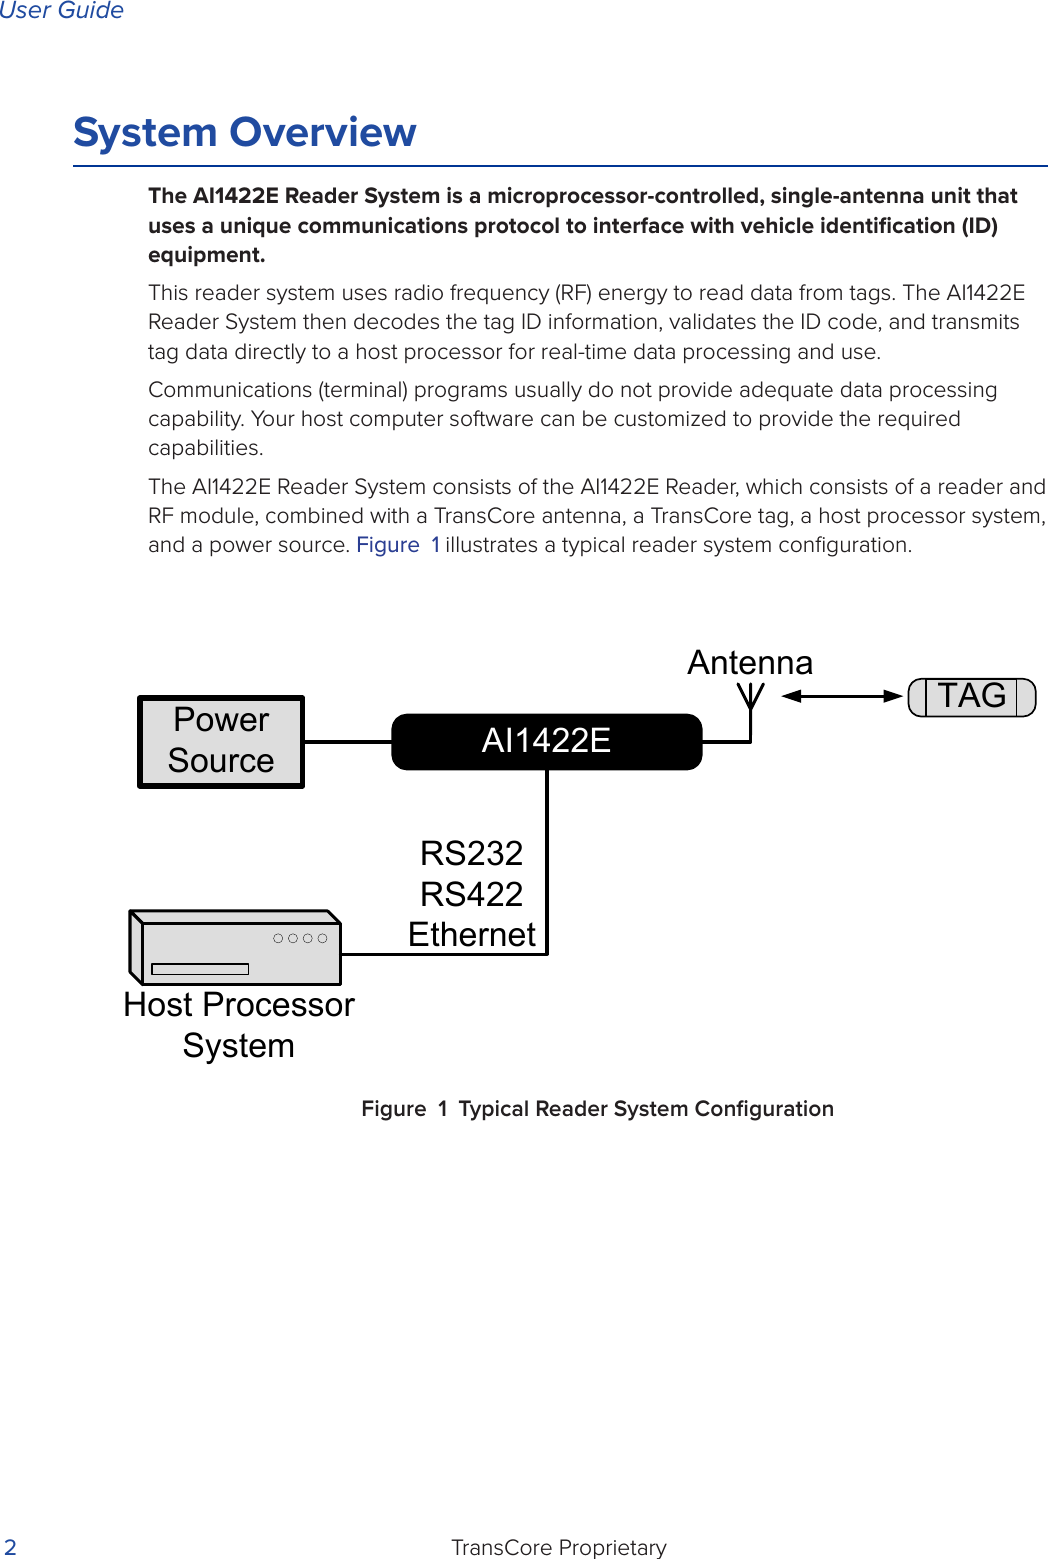 User GuideTransCore Proprietary 2System OverviewThe AI1422E Reader System is a microprocessor-controlled, single-antenna unit that uses a unique communications protocol to interface with vehicle identiﬁcation (ID) equipment.This reader system uses radio frequency (RF) energy to read data from tags. The AI1422E Reader System then decodes the tag ID information, validates the ID code, and transmits tag data directly to a host processor for real-time data processing and use.Communications (terminal) programs usually do not provide adequate data processing capability. Your host computer software can be customized to provide the required capabilities.The AI1422E Reader System consists of the AI1422E Reader, which consists of a reader and RF module, combined with a TransCore antenna, a TransCore tag, a host processor system, and a power source. Figure 1 illustrates a typical reader system conﬁguration.Power SourceAI1422EHost Processor SystemRS232RS422EthernetAntennaTAGFigure 1 Typical Reader System Conﬁguration